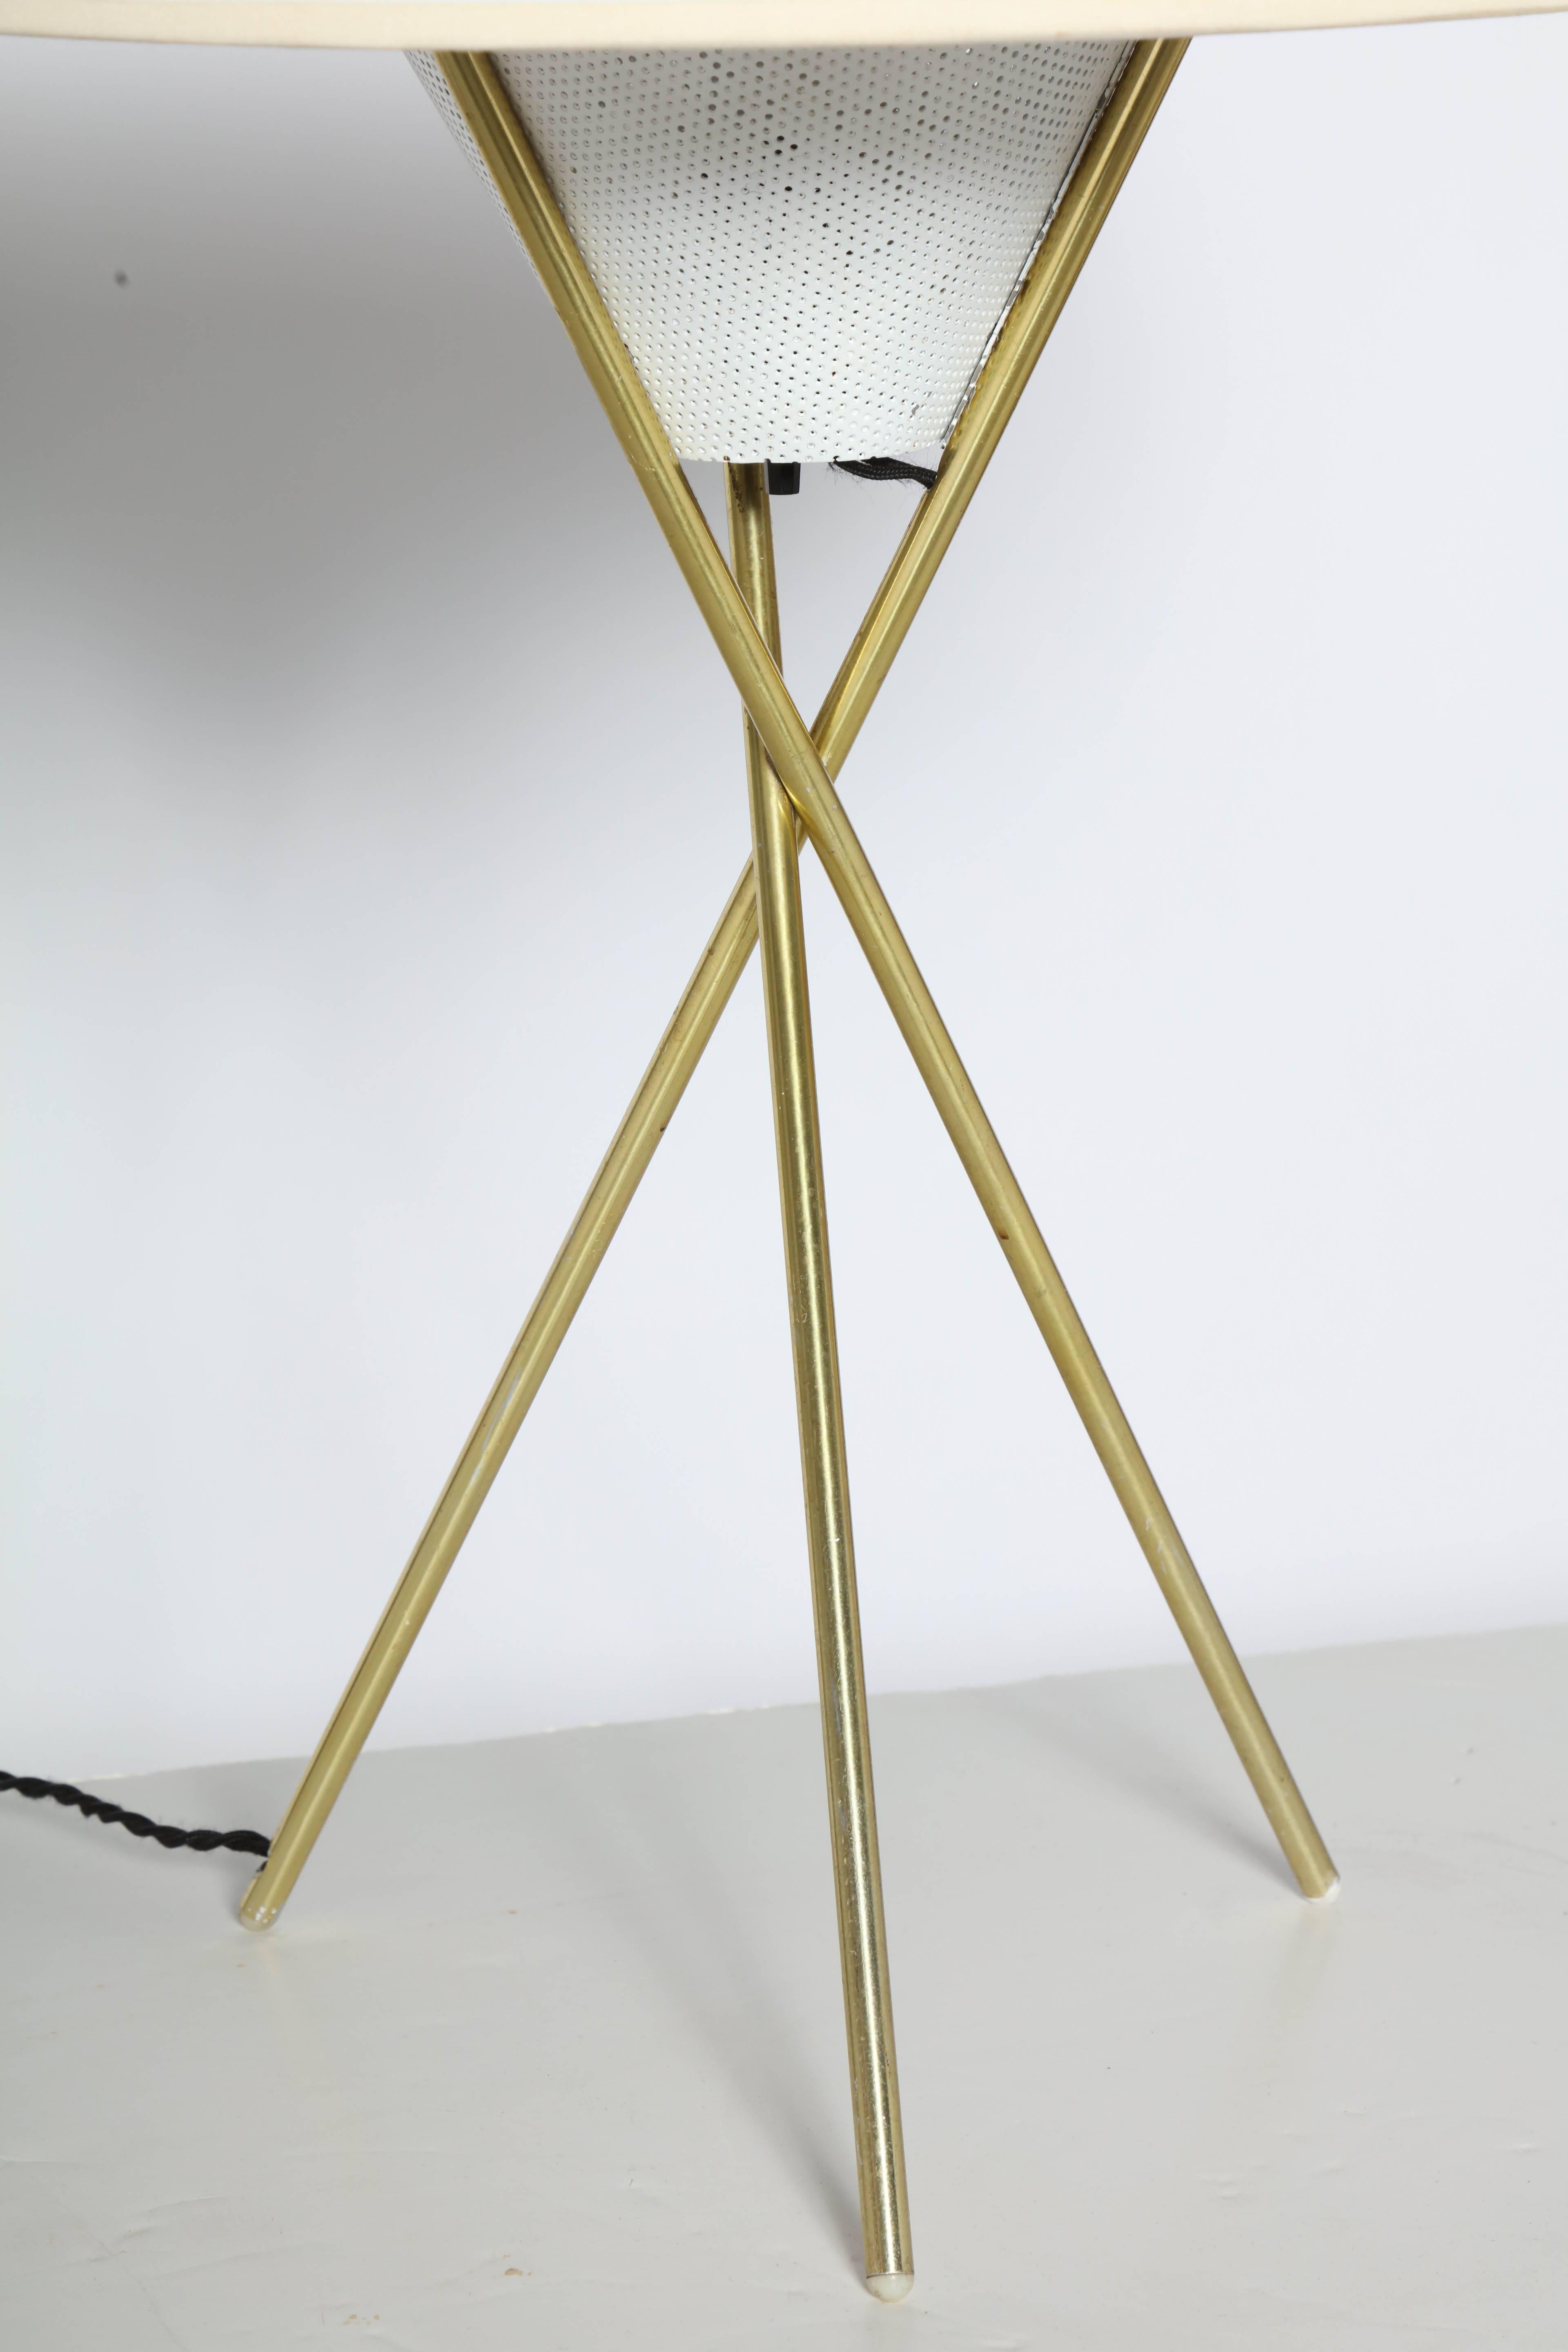 American Gerald Thurston for Lightolier Brass Tripod Table Lamp with White Linen Shade